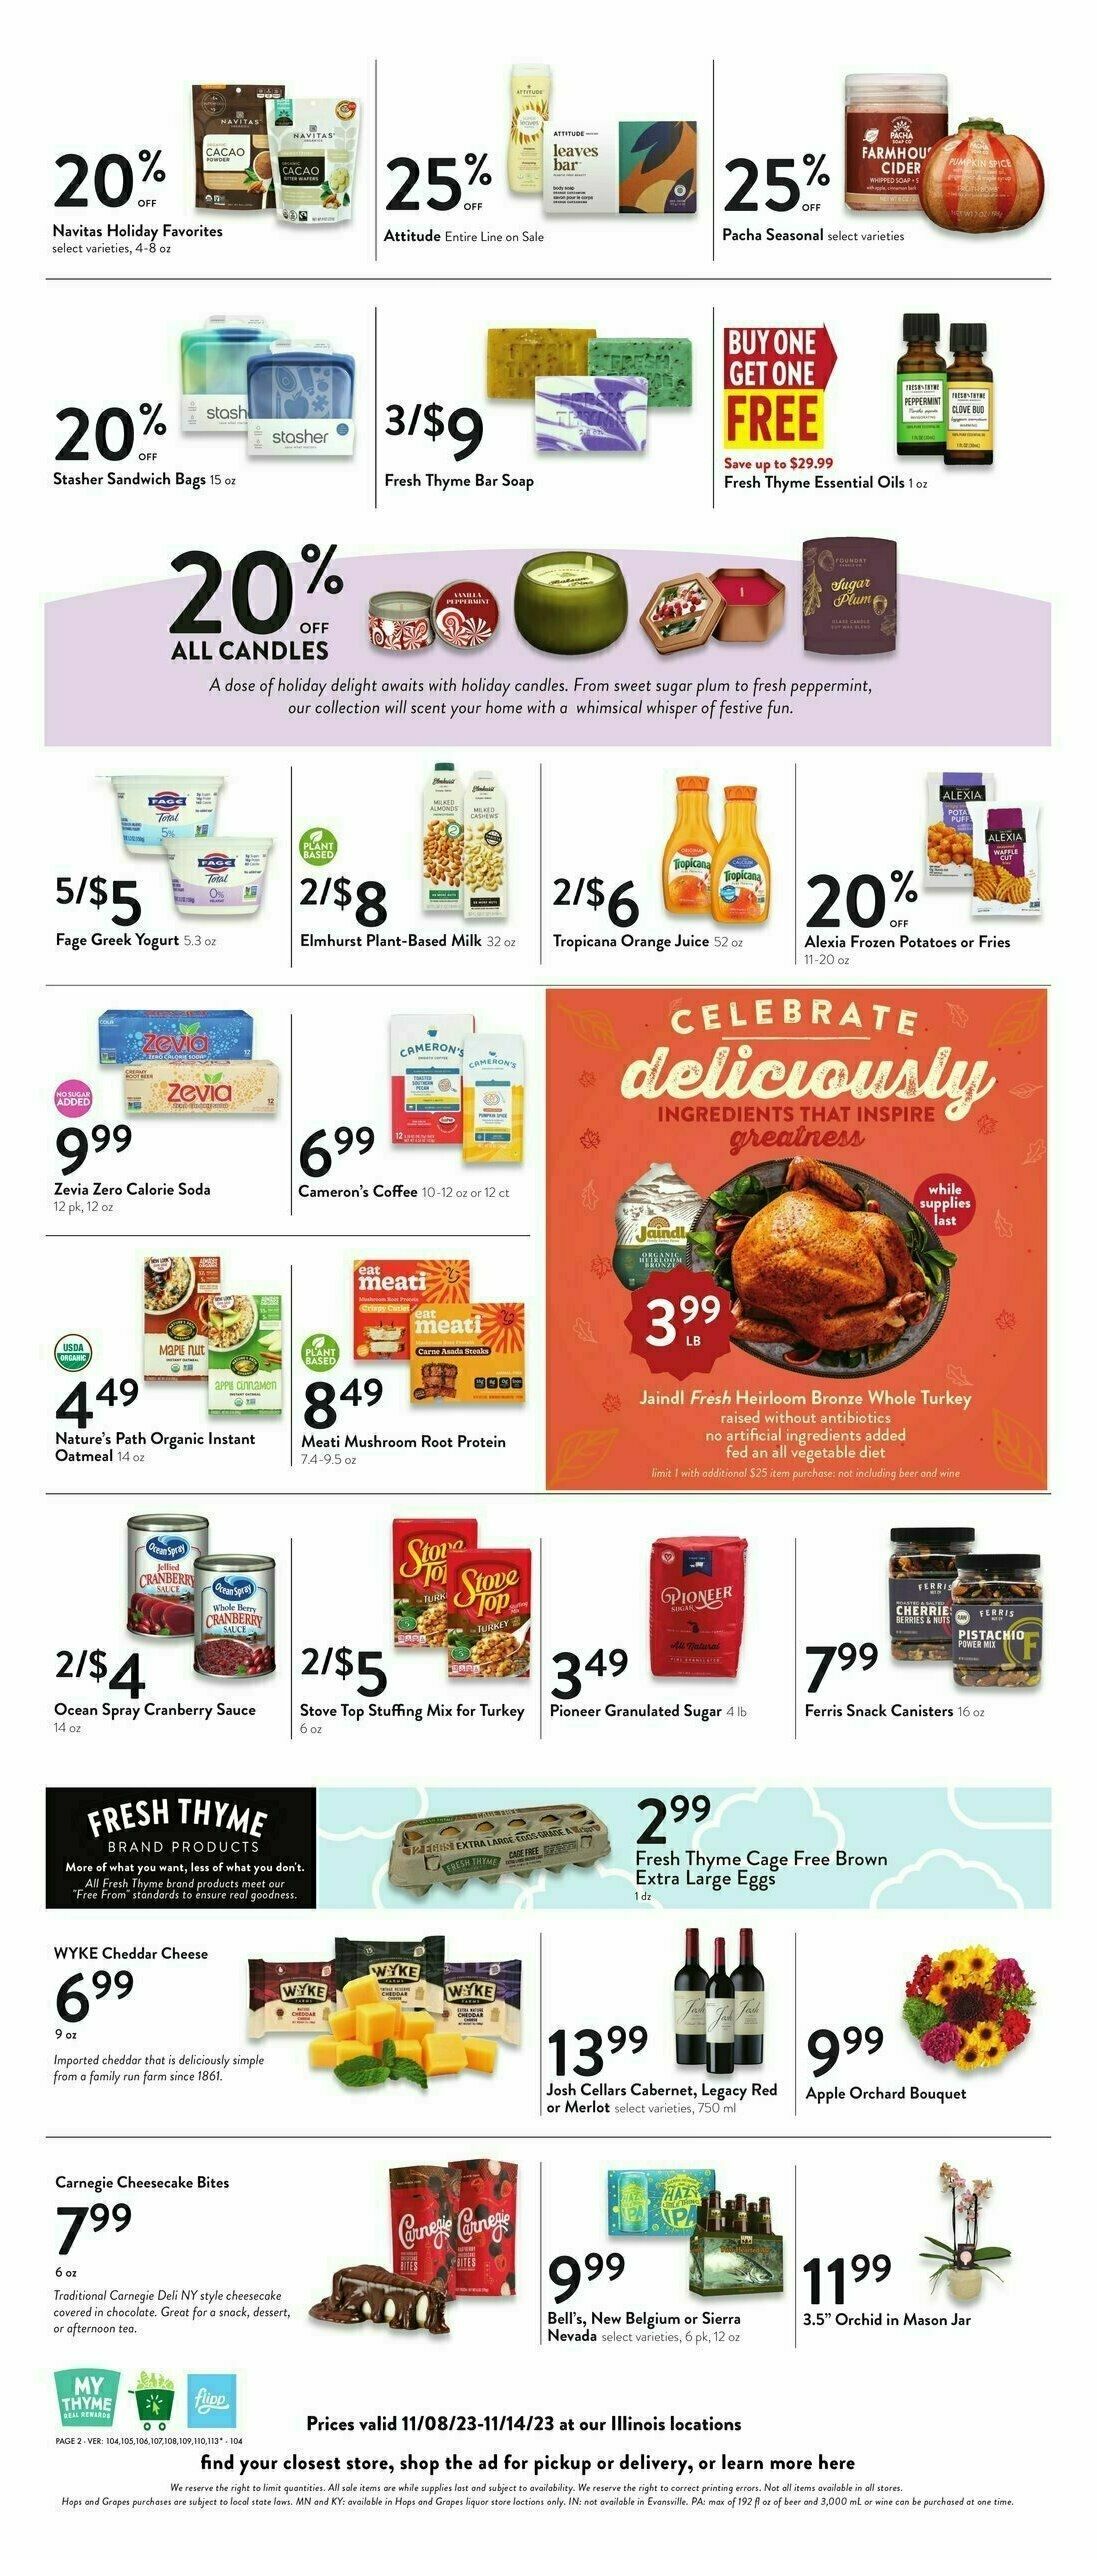 Fresh Thyme Farmers Market Weekly Ad from November 8